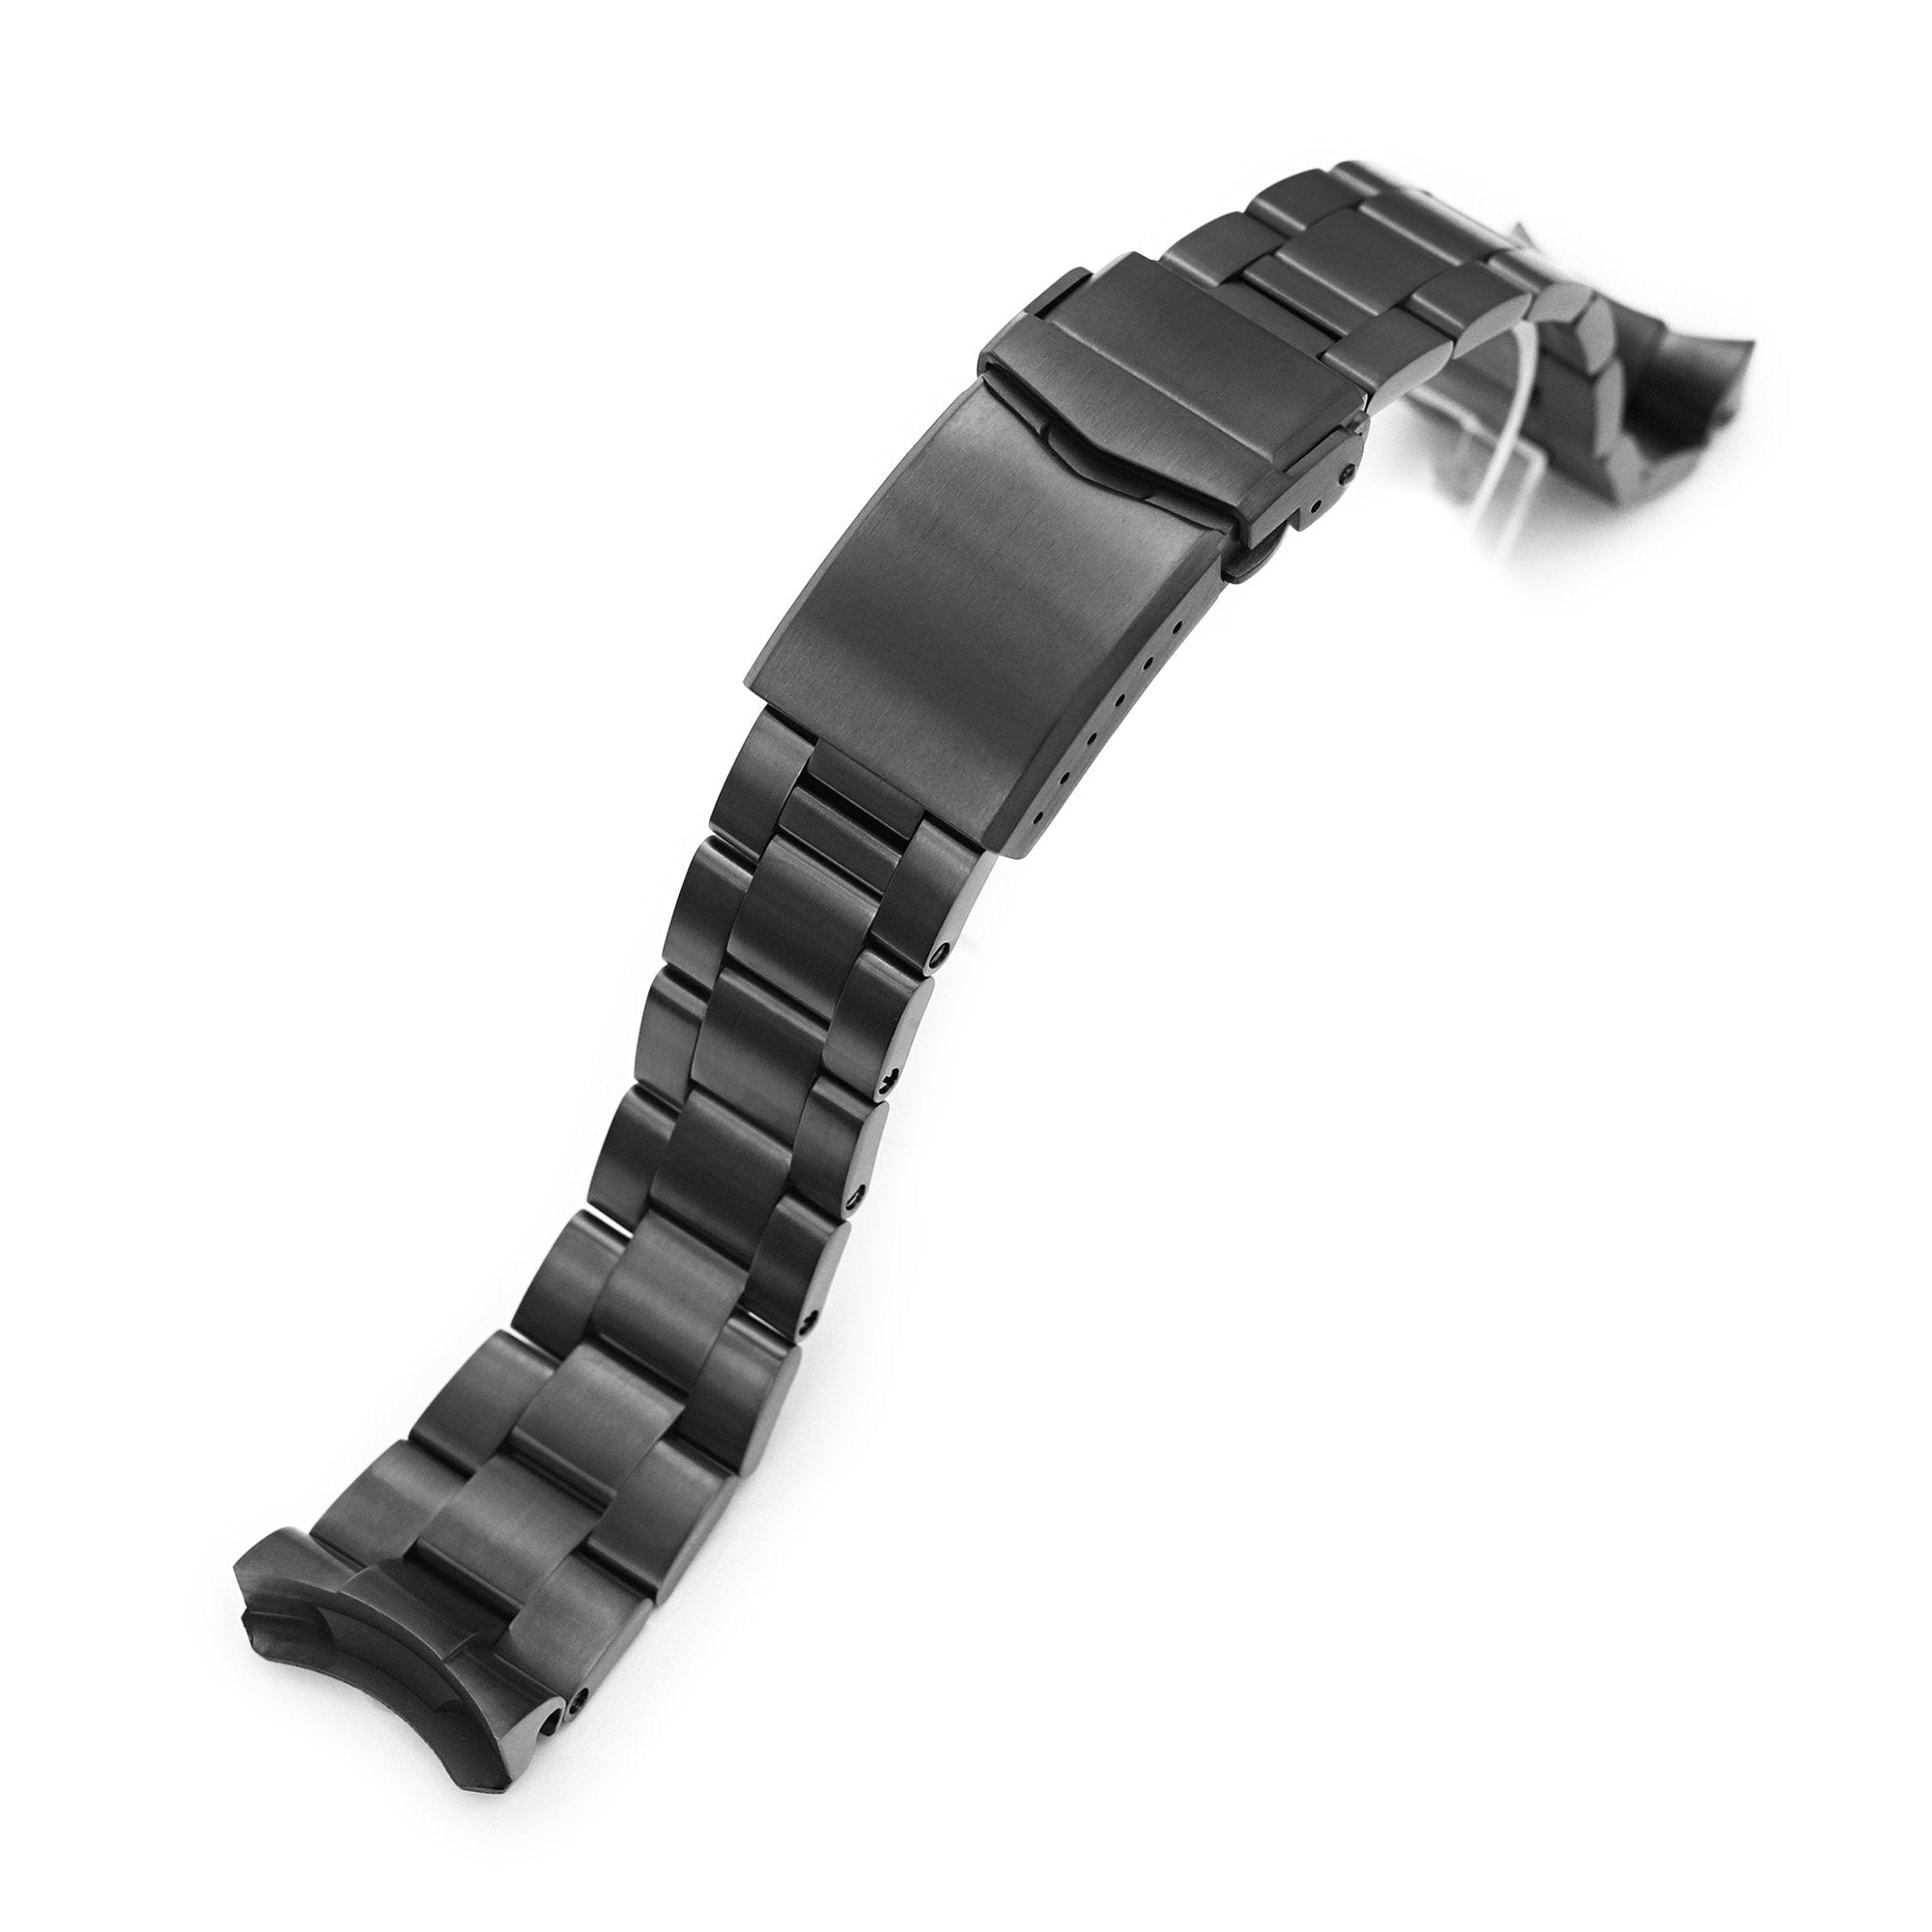 Seiko 5 Sports Curved End O Boyer Watch Bands